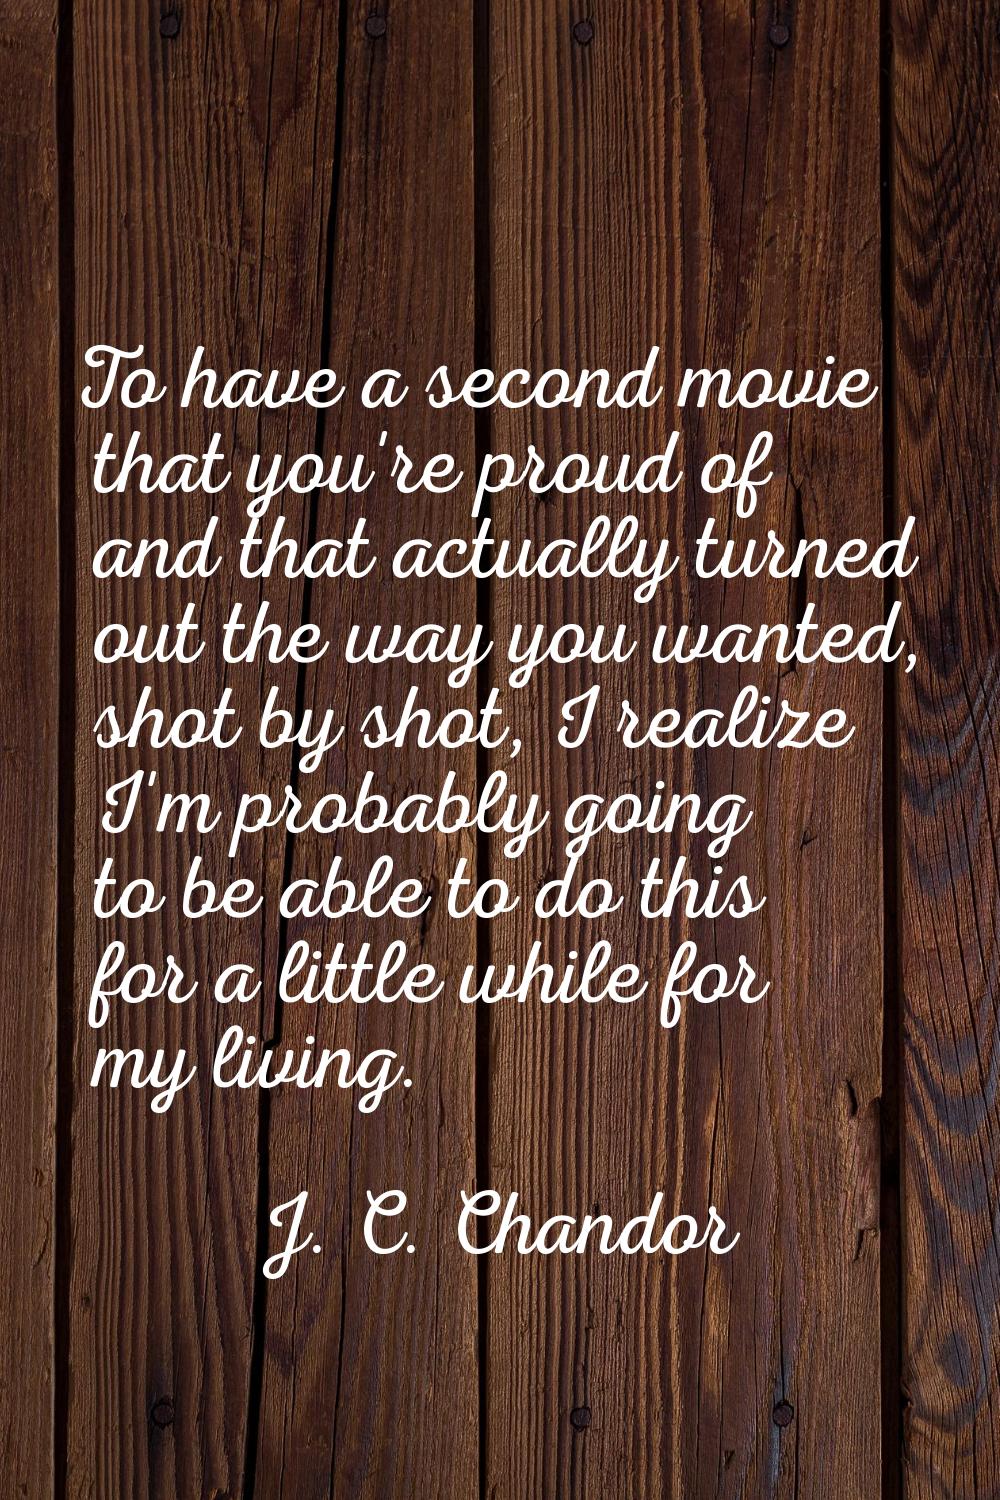 To have a second movie that you're proud of and that actually turned out the way you wanted, shot b